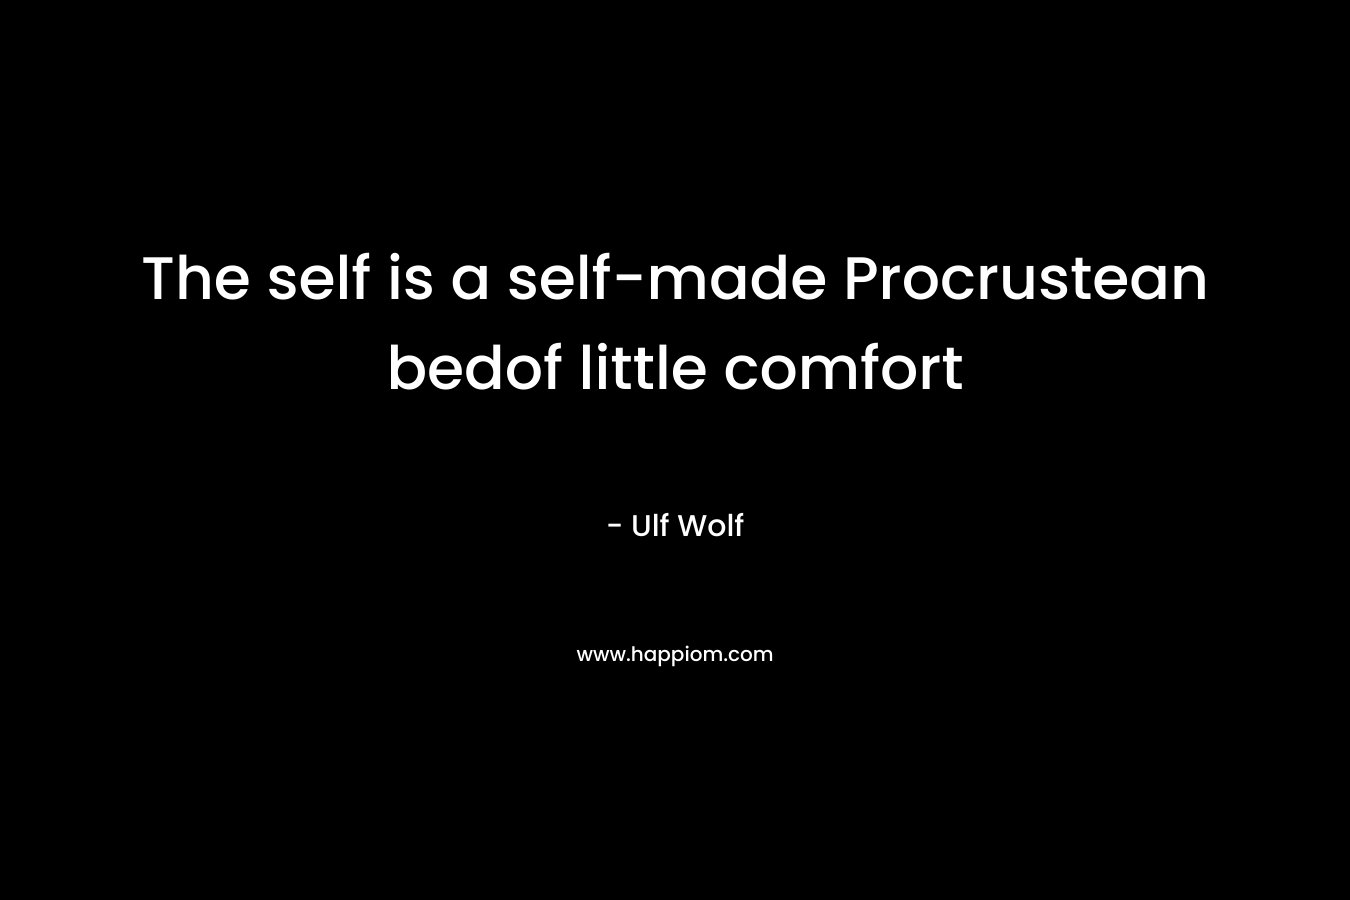 The self is a self-made Procrustean bedof little comfort – Ulf Wolf